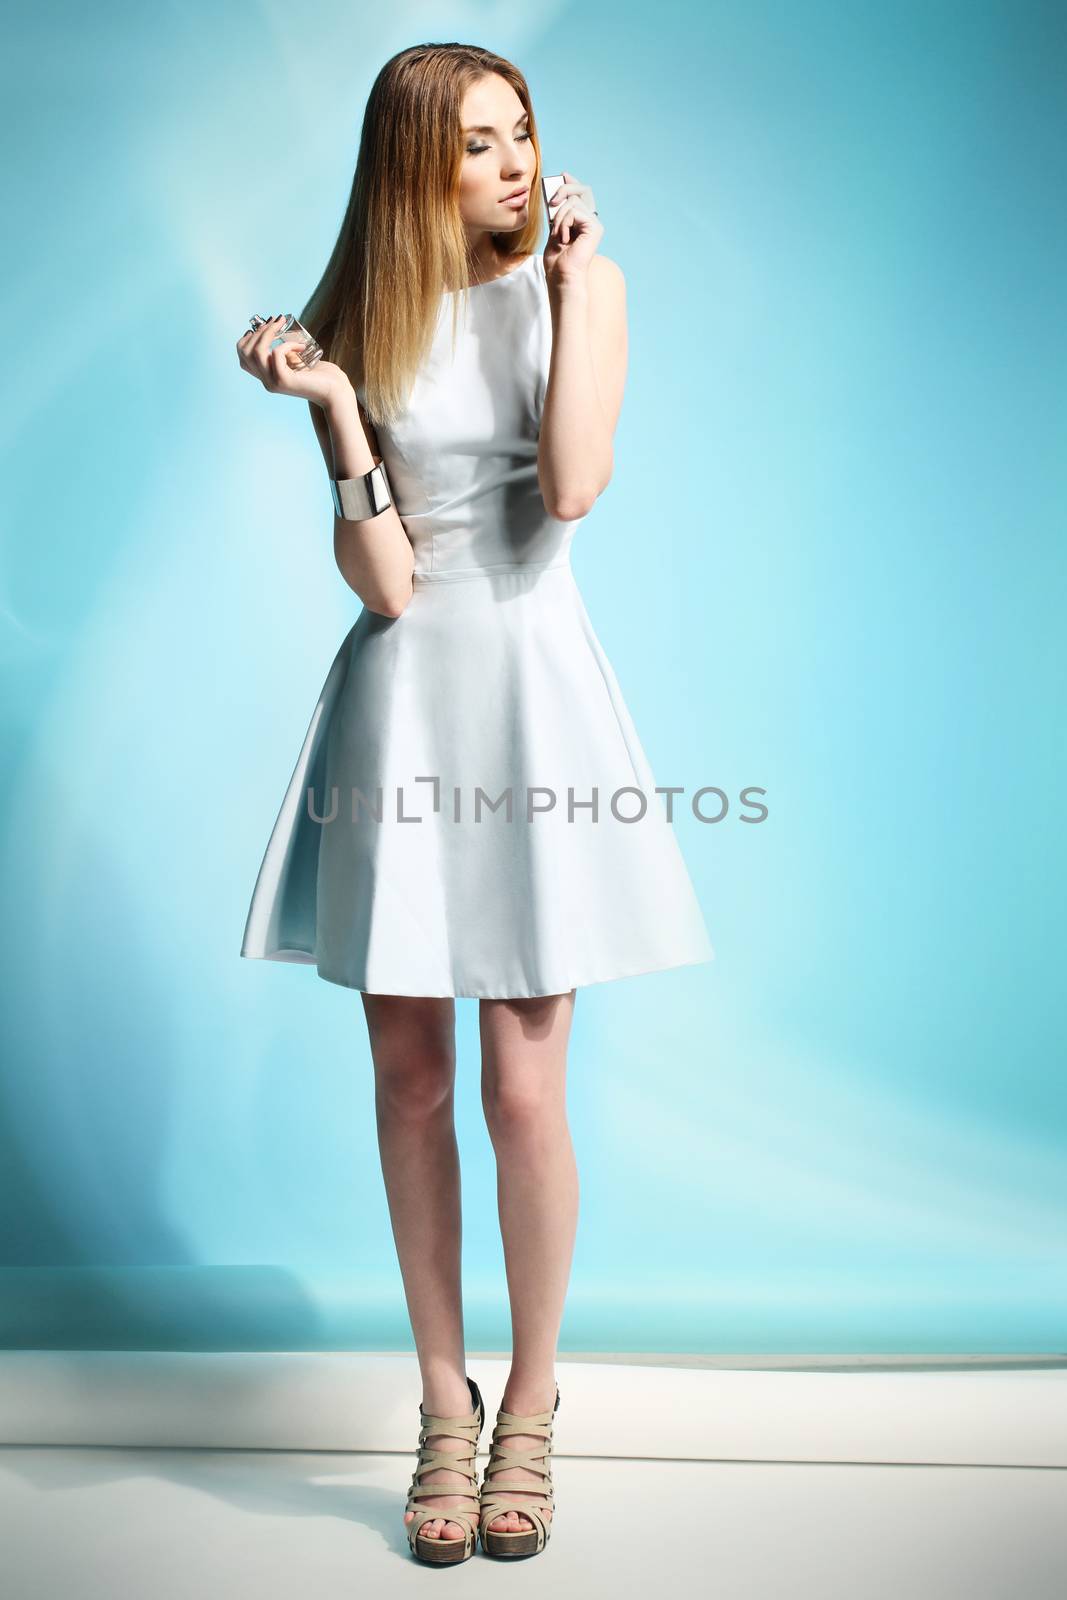 Beautiful girl in a white dress smelling perfume by robert_przybysz